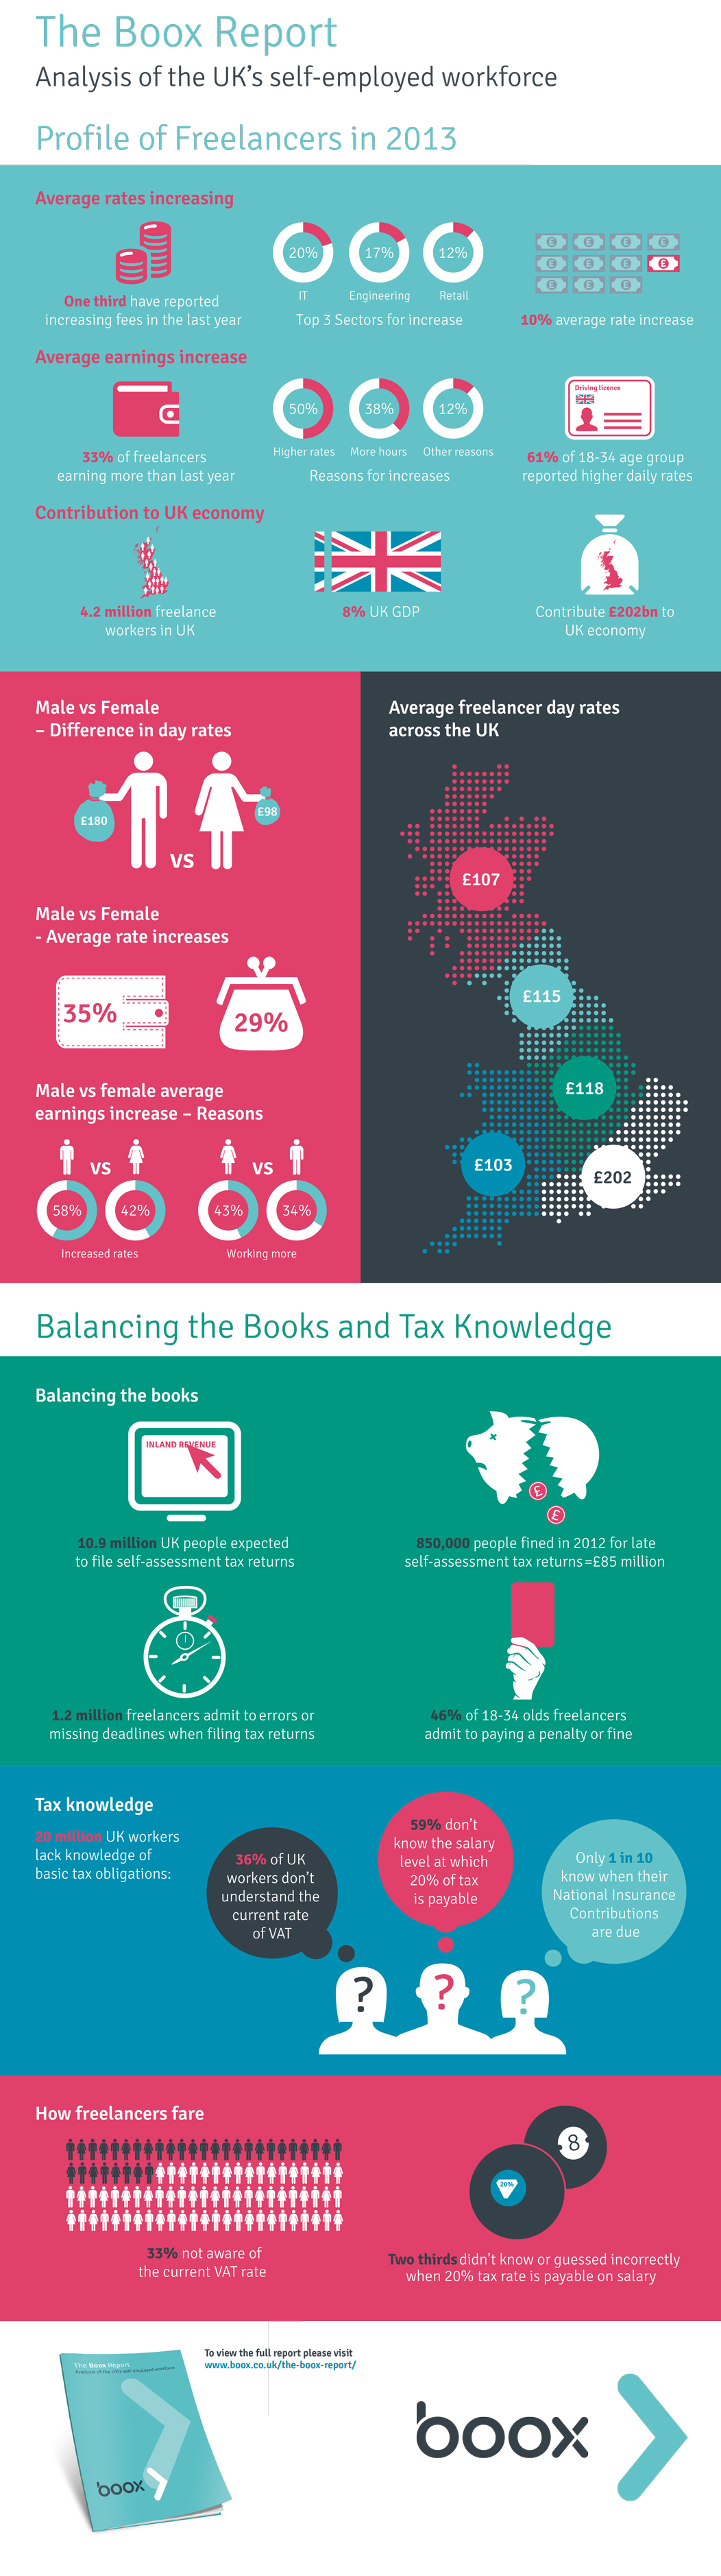 The Boox Report Infographic